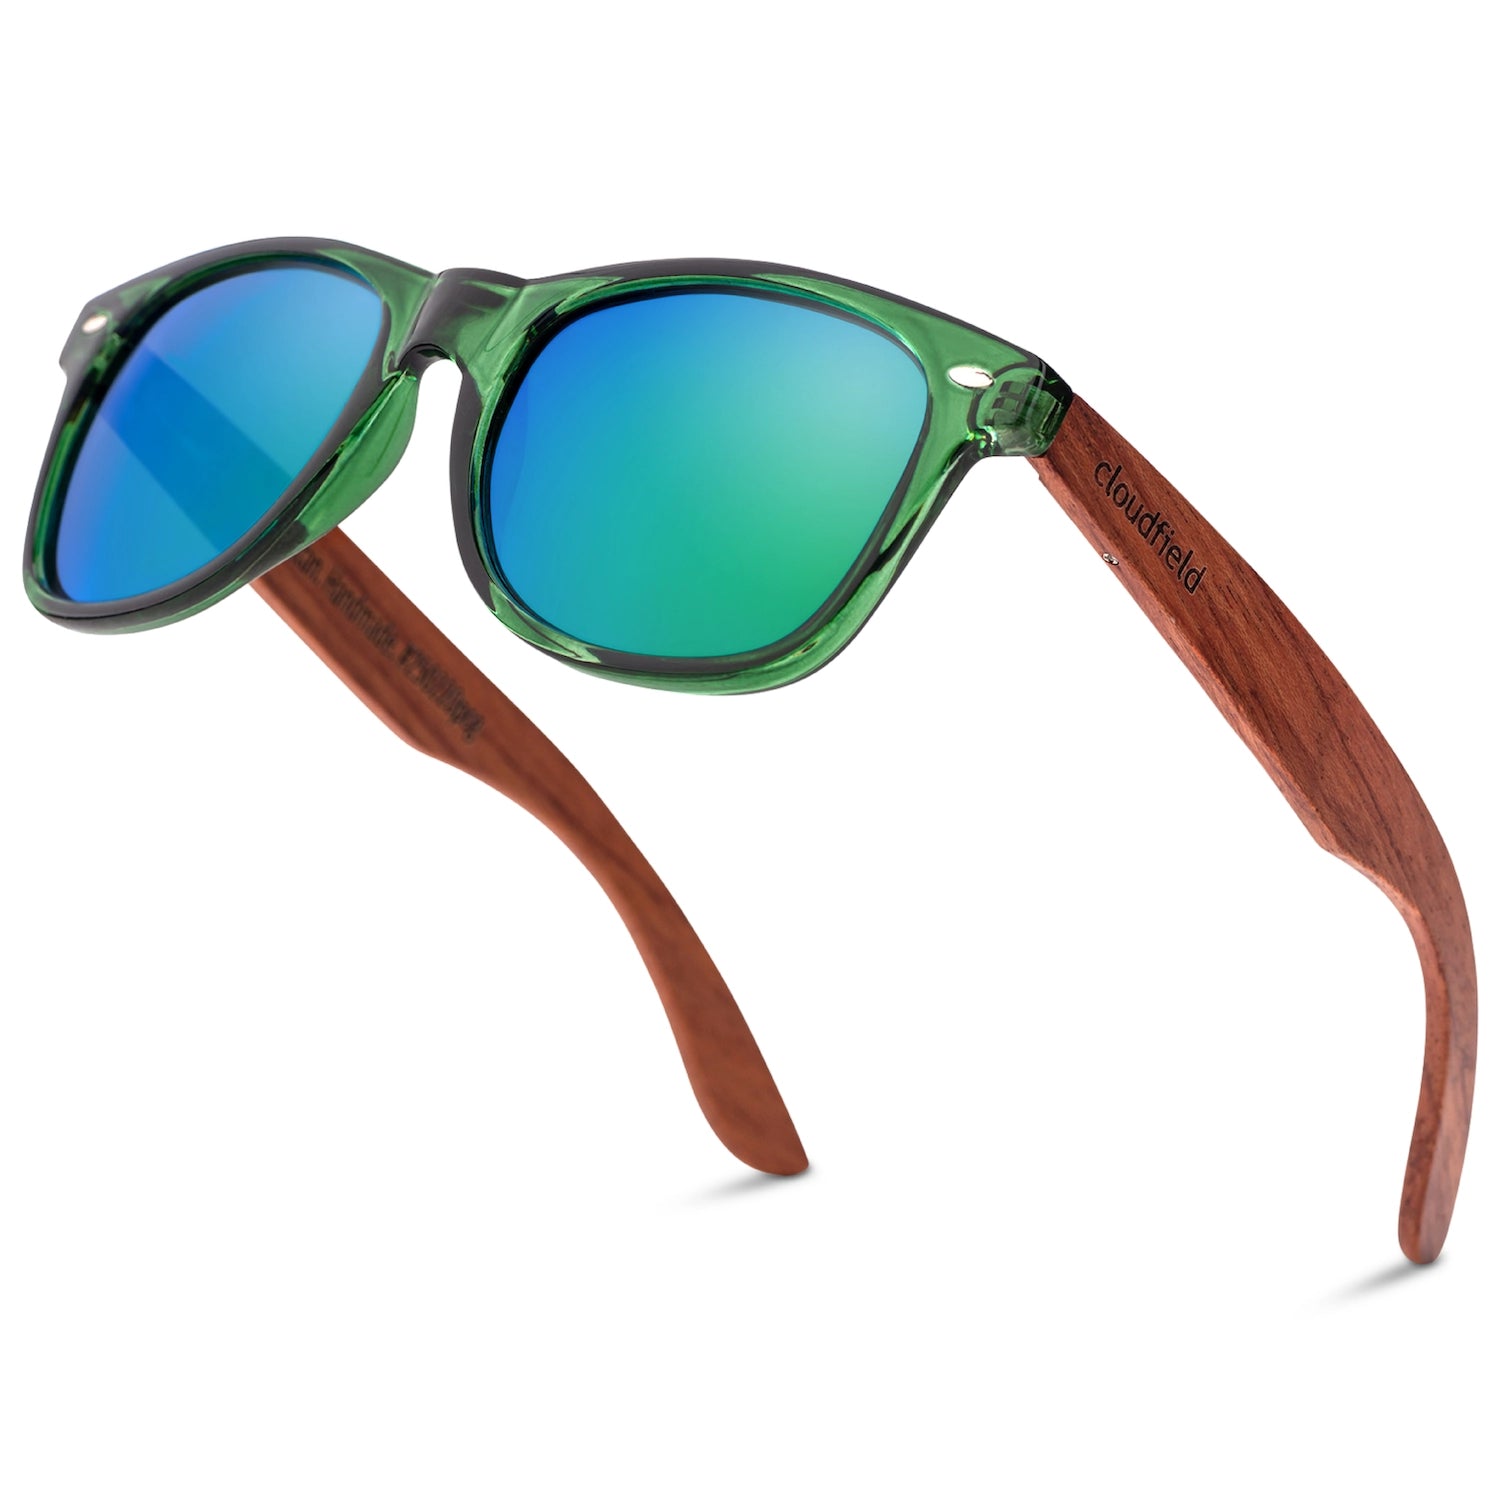 Dark Bamboo Floating Sunglasses for Men and Women with Polarized Lenses | Birthday Gift for Him or Her